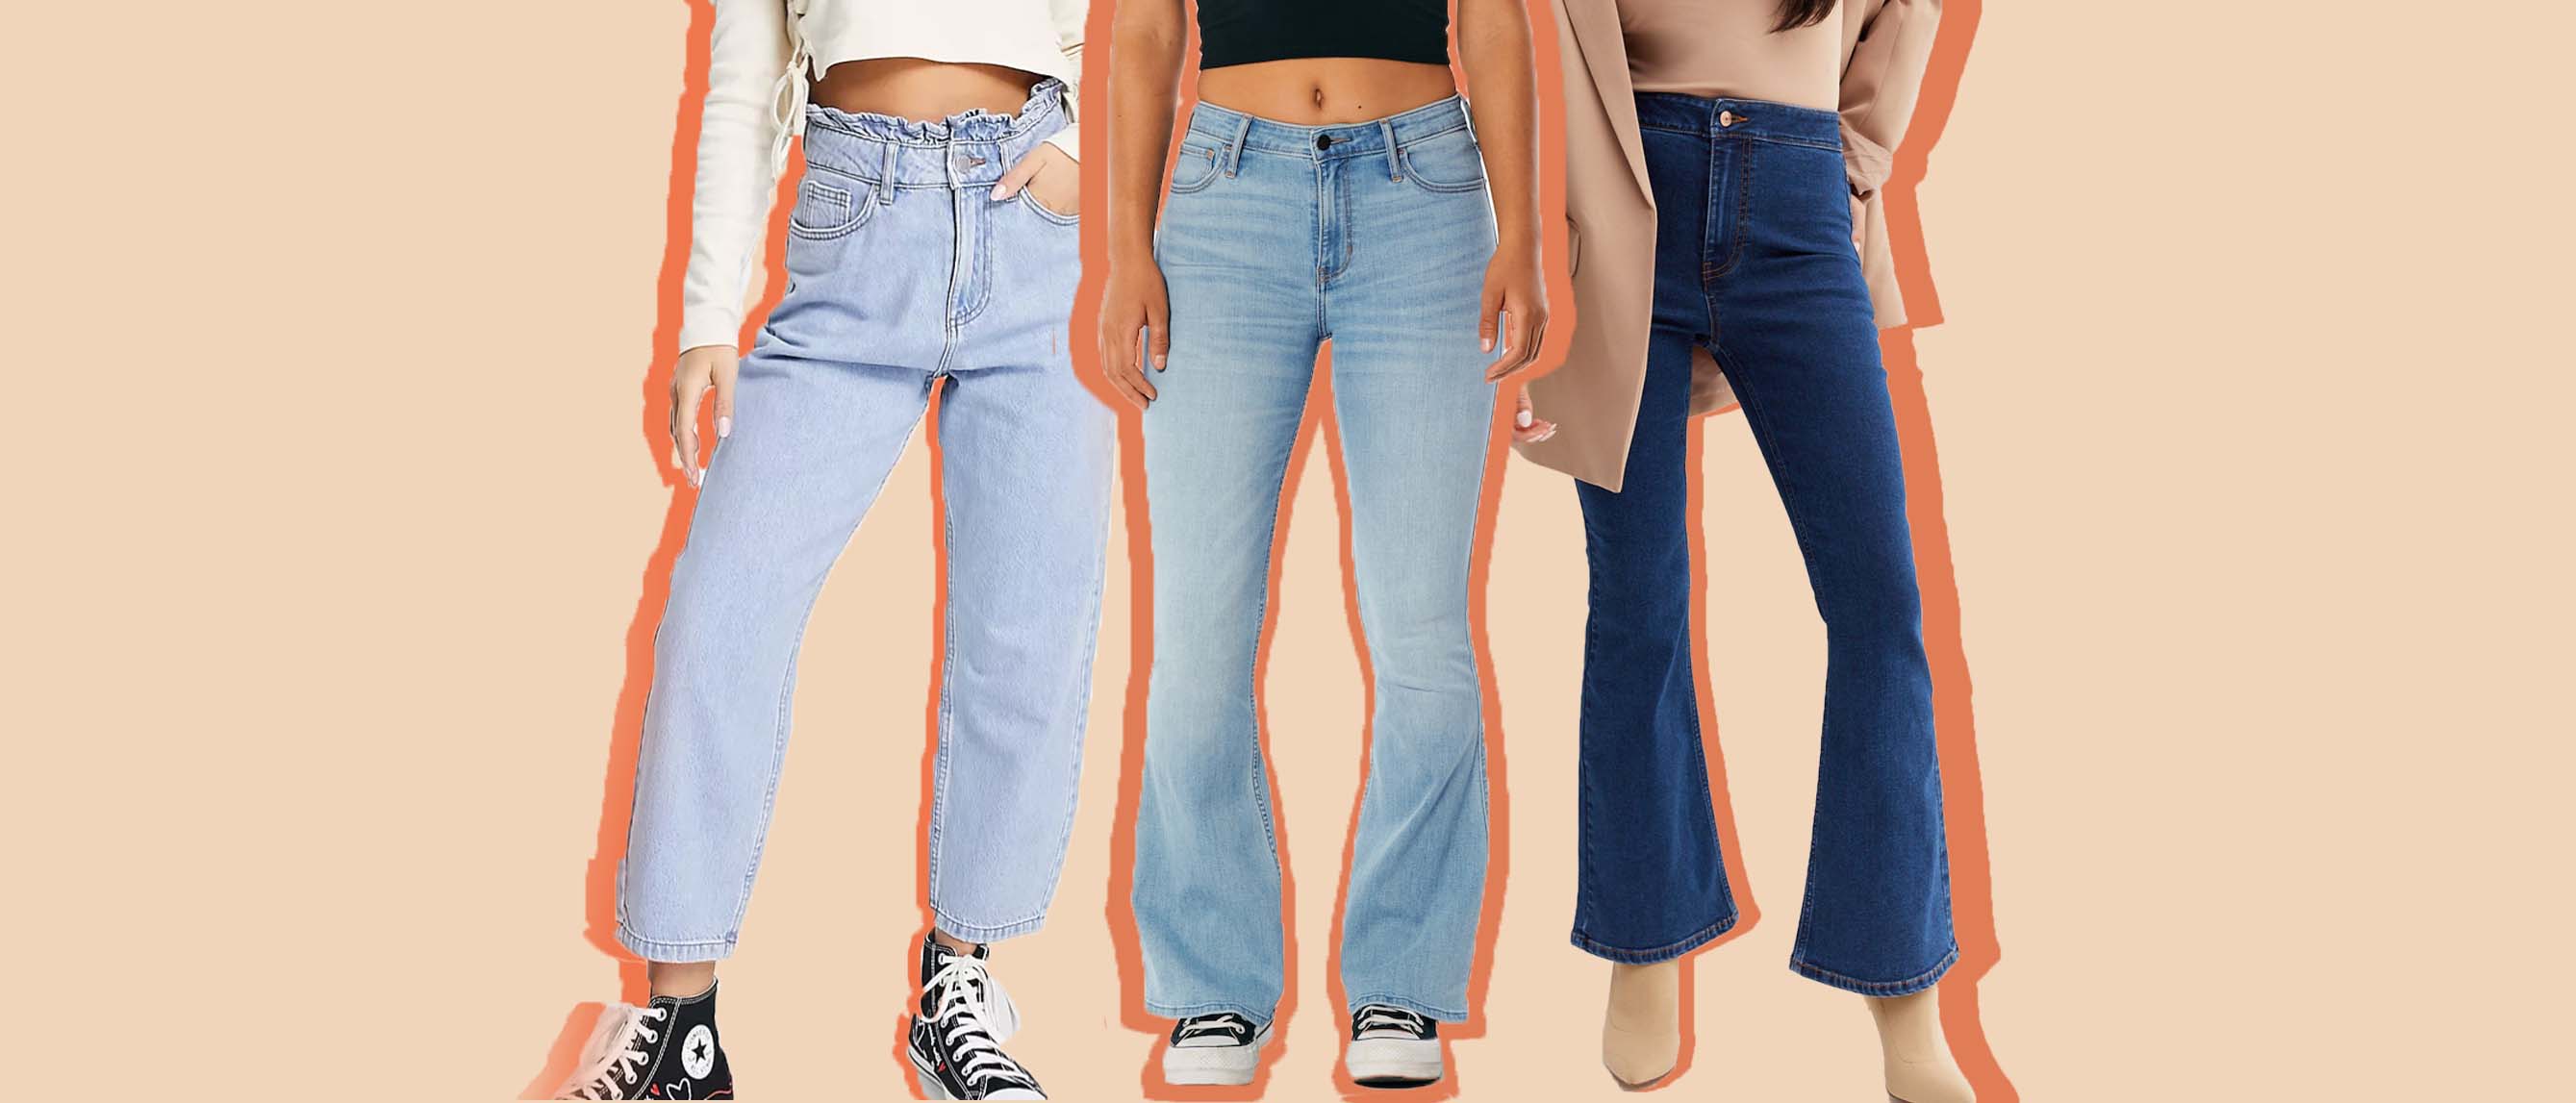 HOLLISTER JEAN HAUL~ FLARED JEANS~ DAD JEANS~ MOM JEANS~ BOOT LEG JEANS!! 